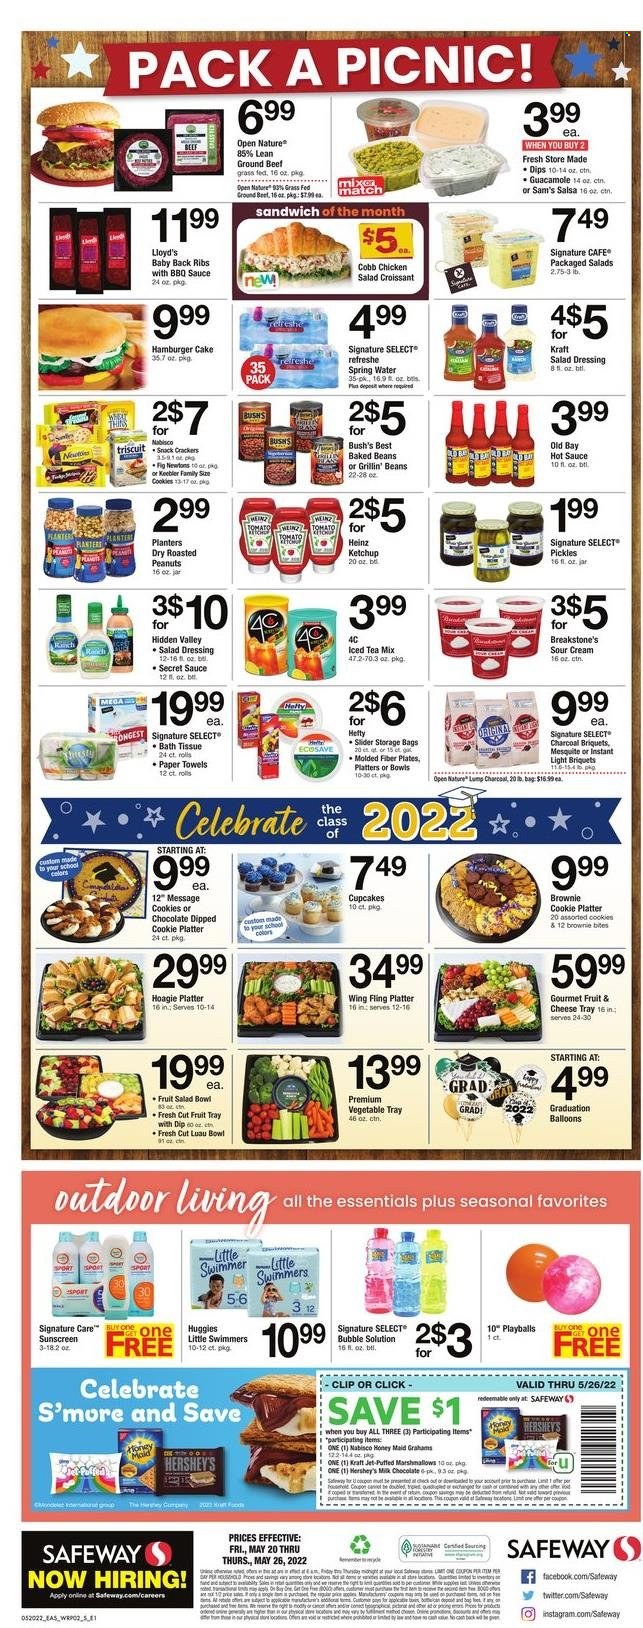 thumbnail - Safeway Flyer - 05/27/2022 - 06/02/2022 - Sales products - cake, croissant, cupcake, brownies, beef meat, ground beef, hamburger, pork meat, pork ribs, pork back ribs, sandwich, sauce, Kraft®, sour cream, Hershey's, cookies, marshmallows, milk chocolate, chocolate, snack, crackers, Keebler, Thins, Heinz, pickles, guacamole, baked beans, fruit salad, Honey Maid, BBQ sauce, salad dressing, hot sauce, ketchup, dressing, salsa, roasted peanuts, peanuts, Planters, ice tea, spring water, bath tissue, kitchen towels, paper towels, Jet, Hefty, storage bag, plate, salad bowl, balloons, briquettes, charcoal, Huggies. Page 2.